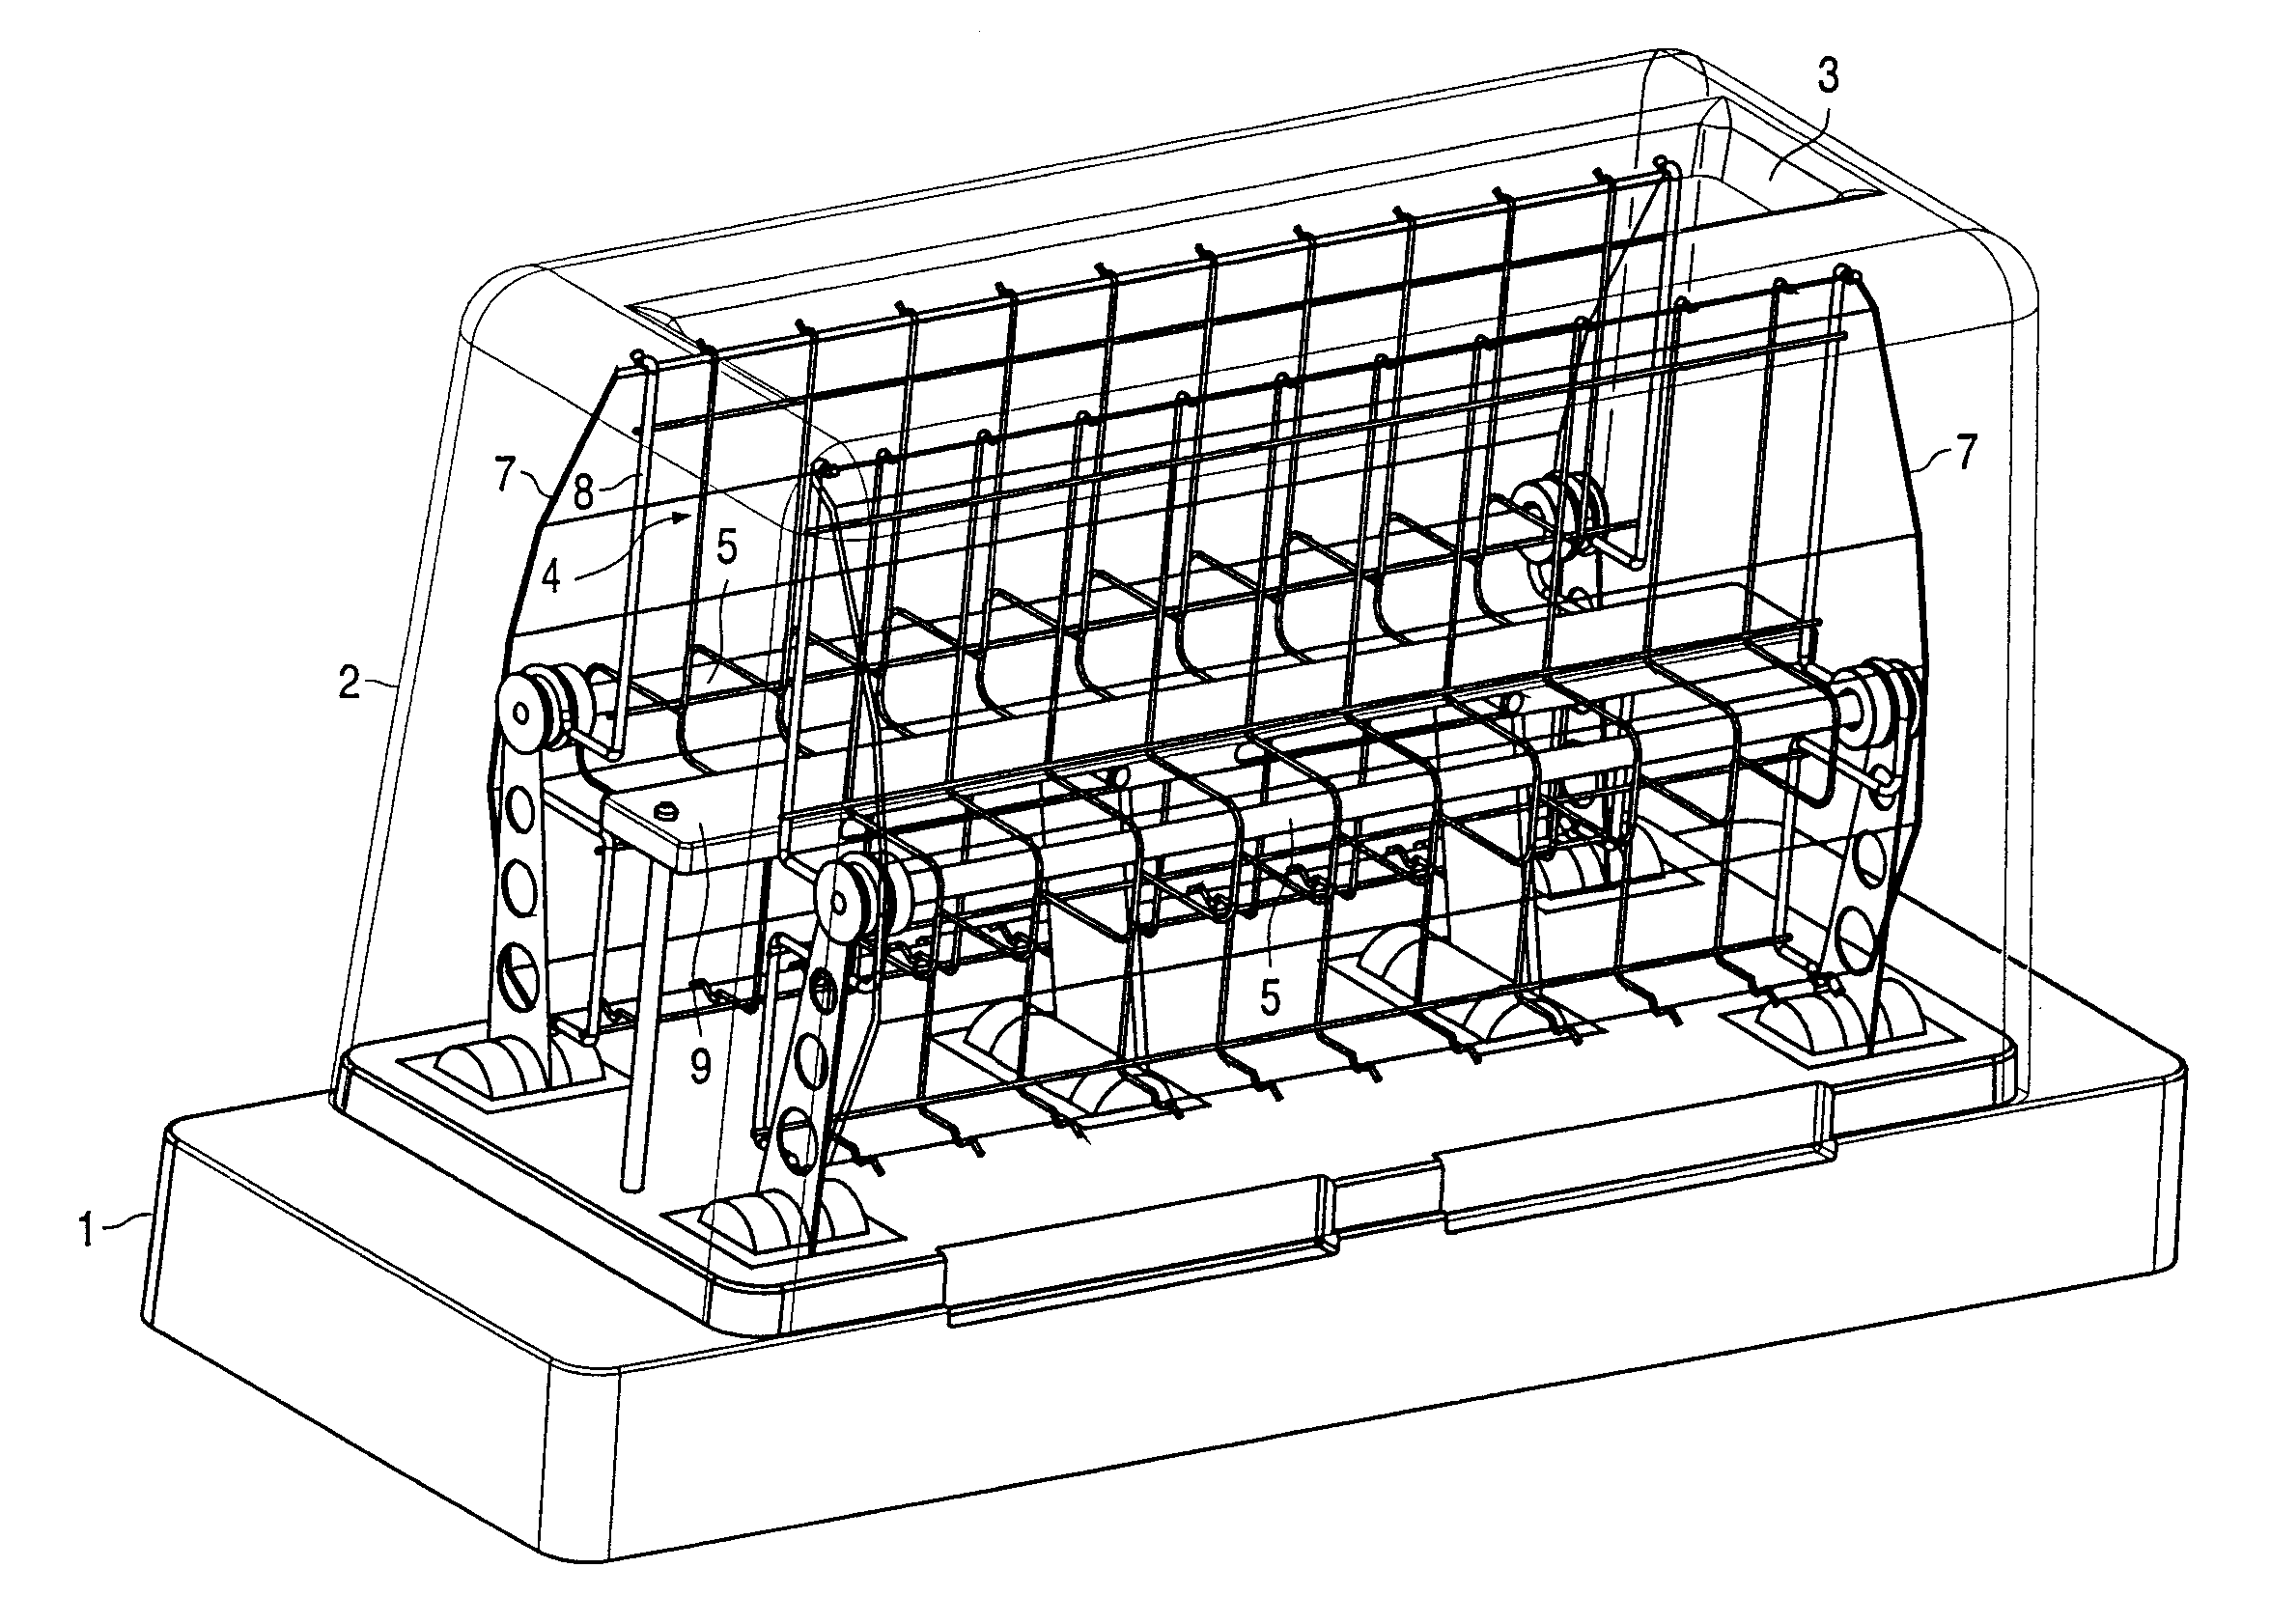 Apparatus for toasting bread